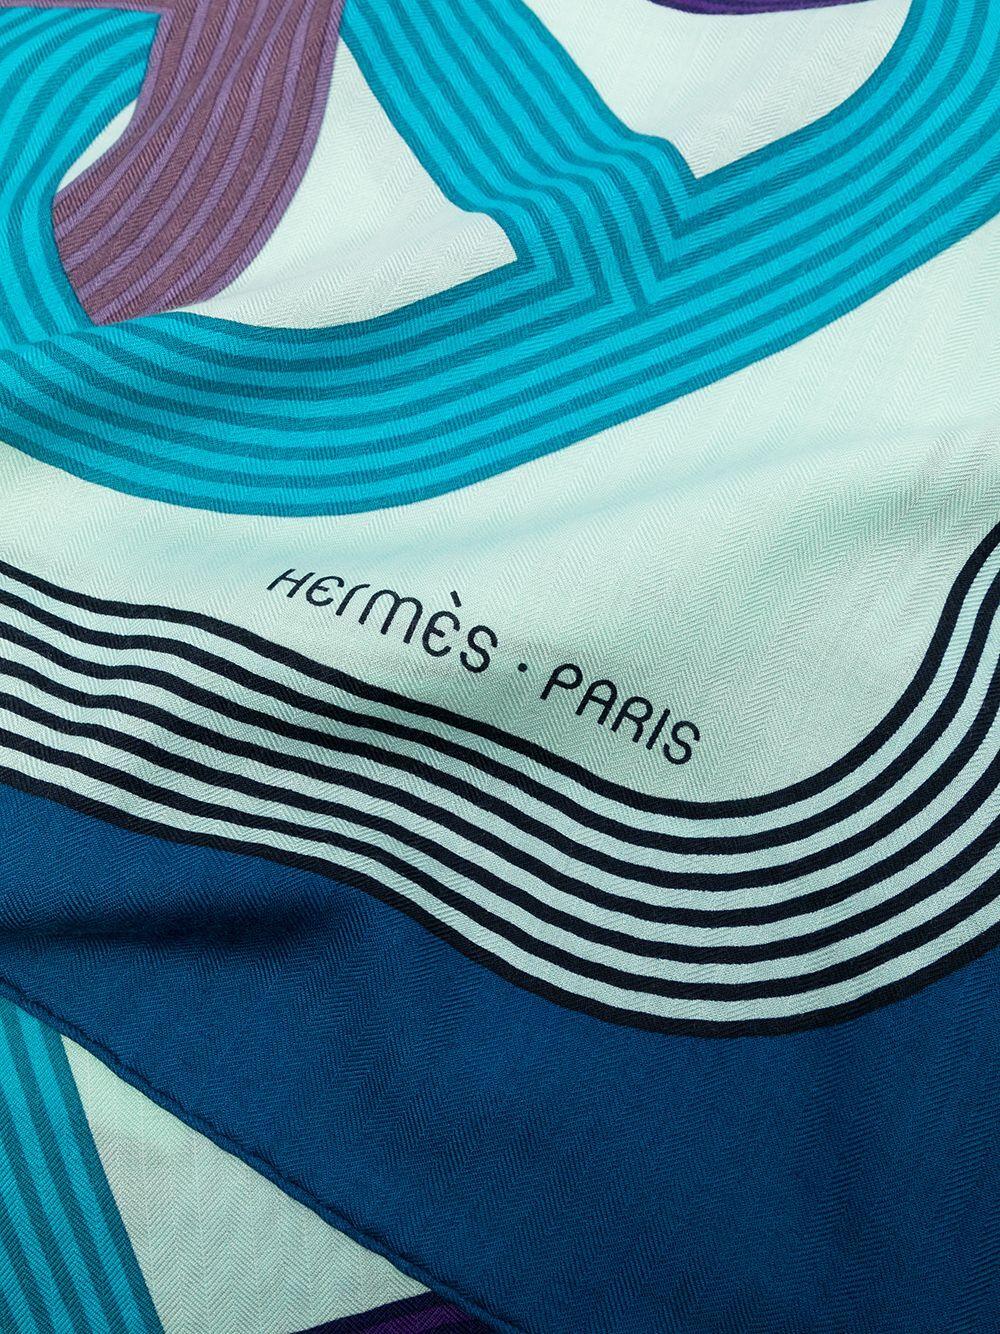 First designed in 1938 by Robert Dumas, the Chaîne d'Ancre became a recurring pattern in Hermès' creations. Crafted from a blend of cashmere and silk in blue and purple hues, it boasts a timeless print. Finished with the brand's logo on the front